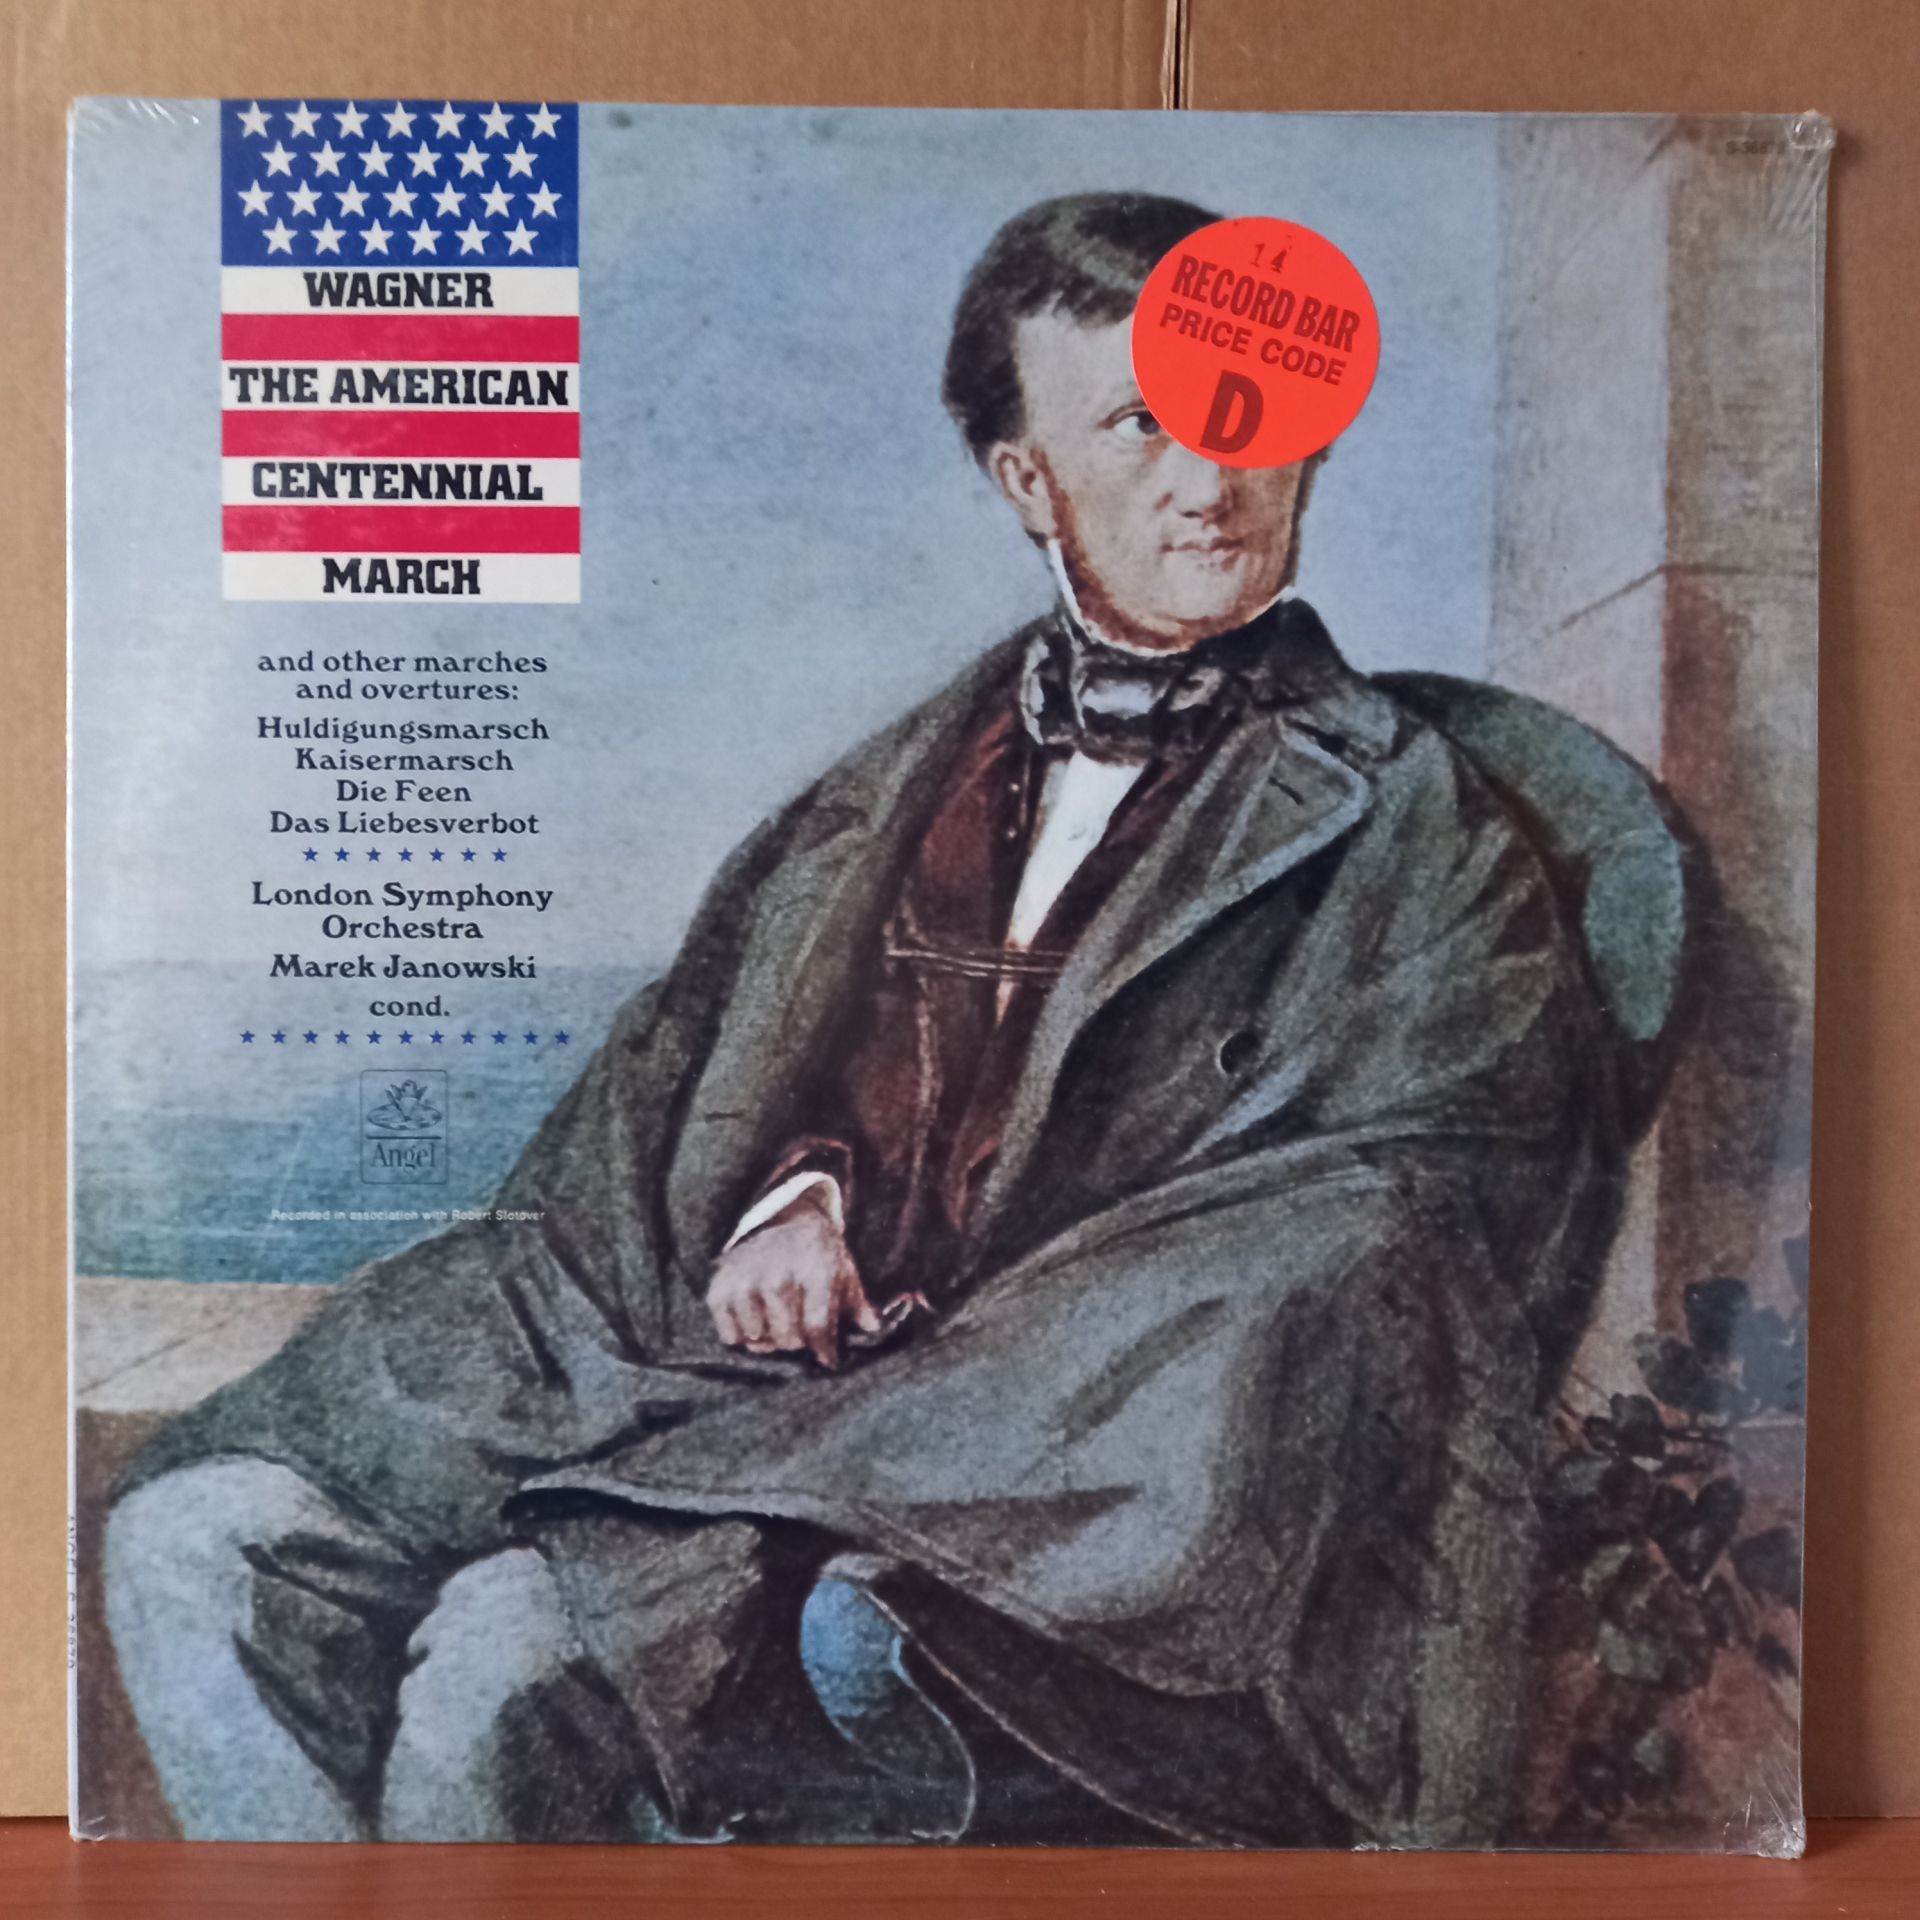 WAGNER: THE AMERICAN CENTENNIAL MARCH AND OTHER MARCHES AND OVERTURES / THE LONDON SYMPHONY ORCHESTRA, MAREK JANOWSKI (1972) - LP DÖNEM BASKISI SIFIR PLAK